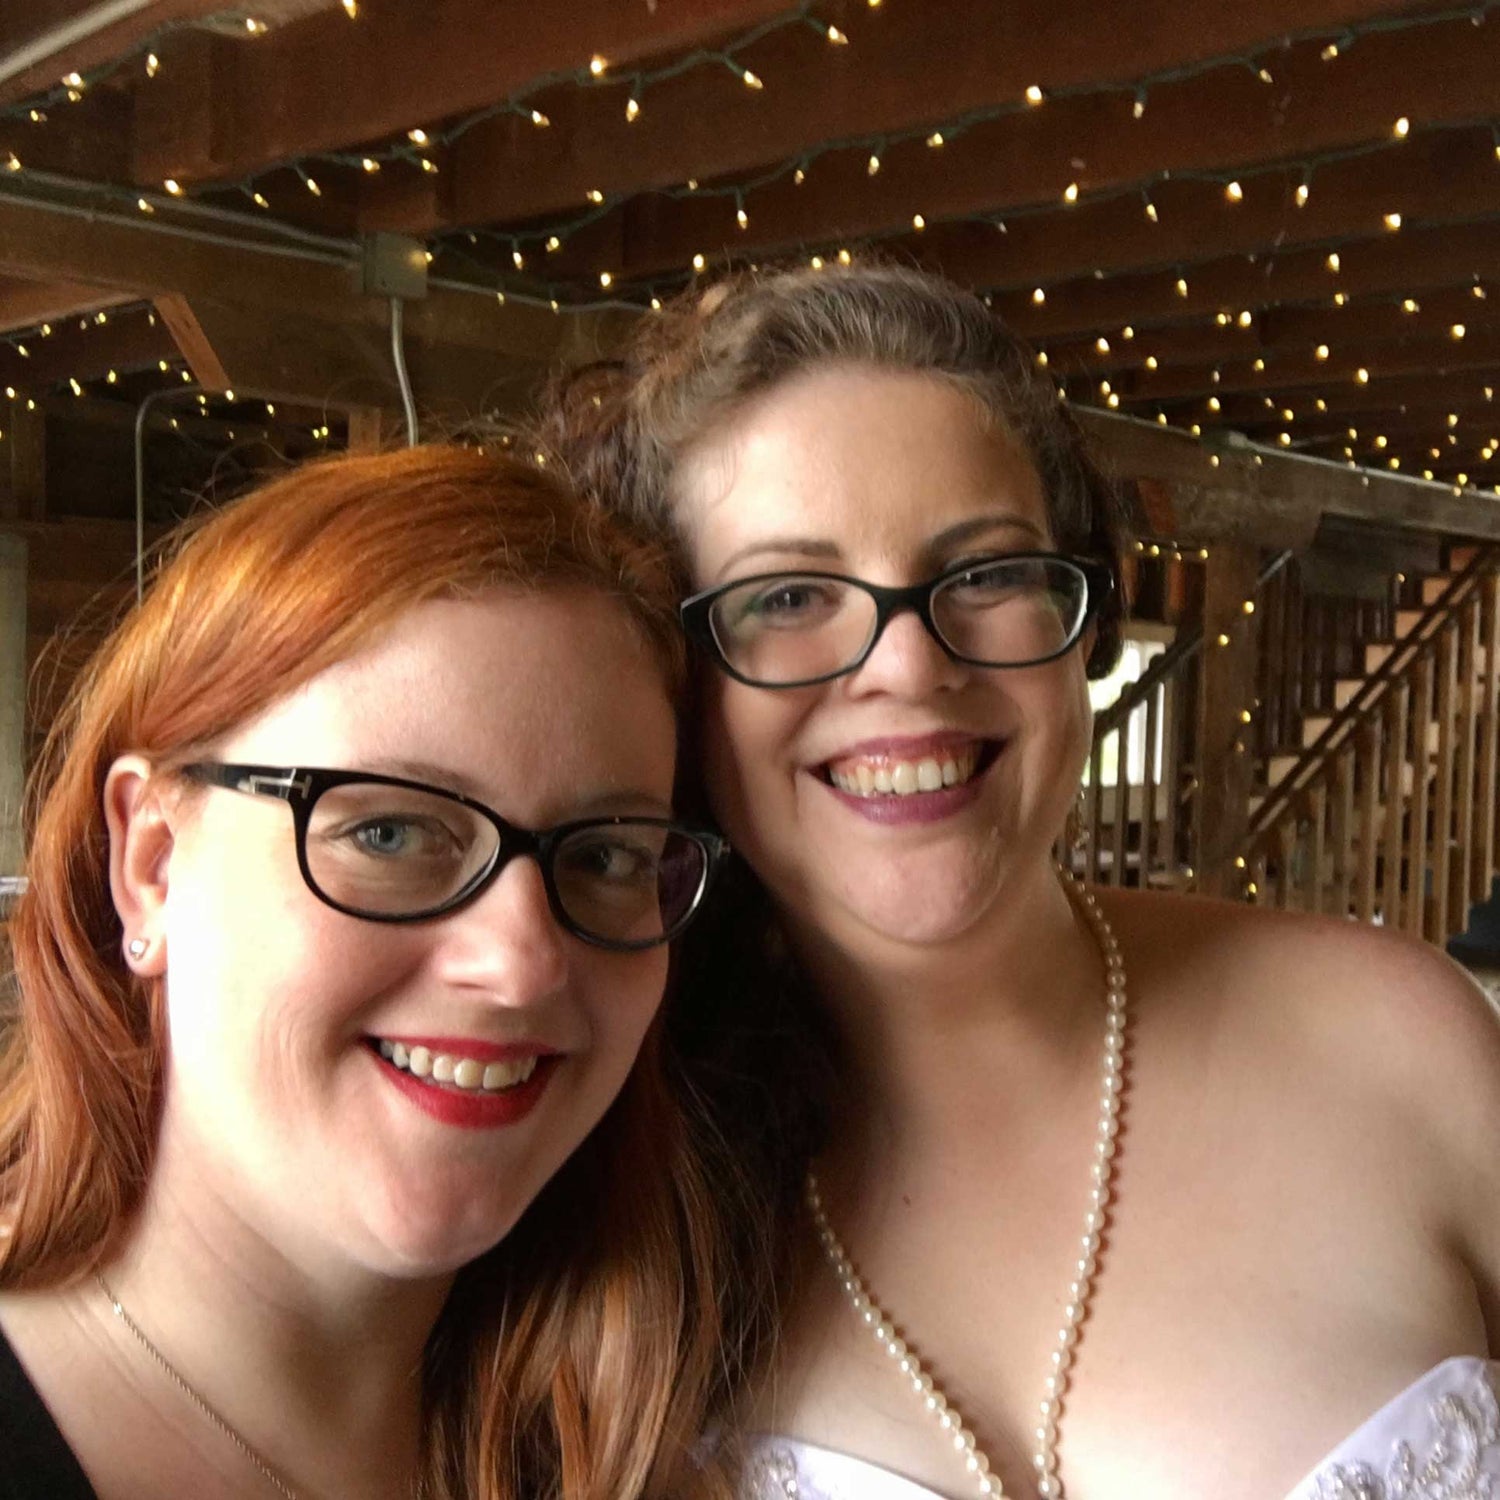 Red haired woman with glasses next to a bride with brown hair and glasses wearing a wedding dress and pearl necklace